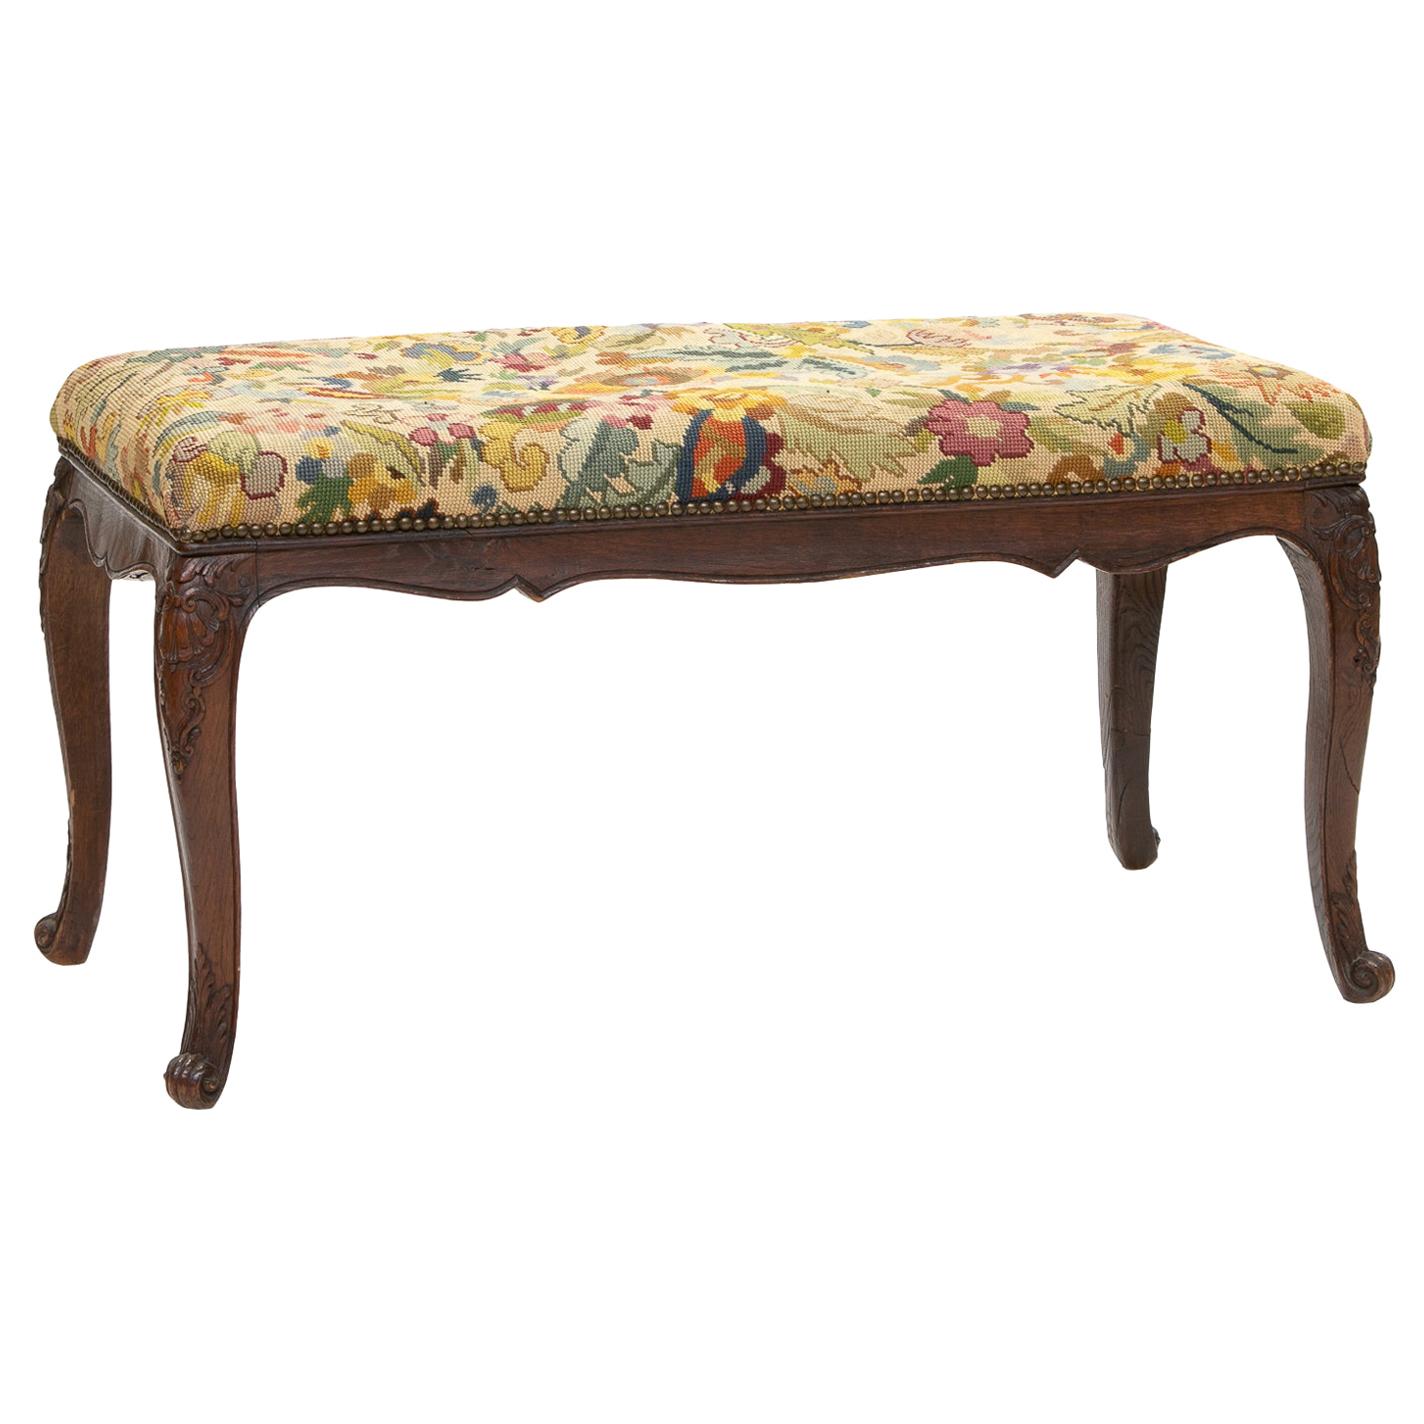 19th Century French Needlepoint Tapestry Bench